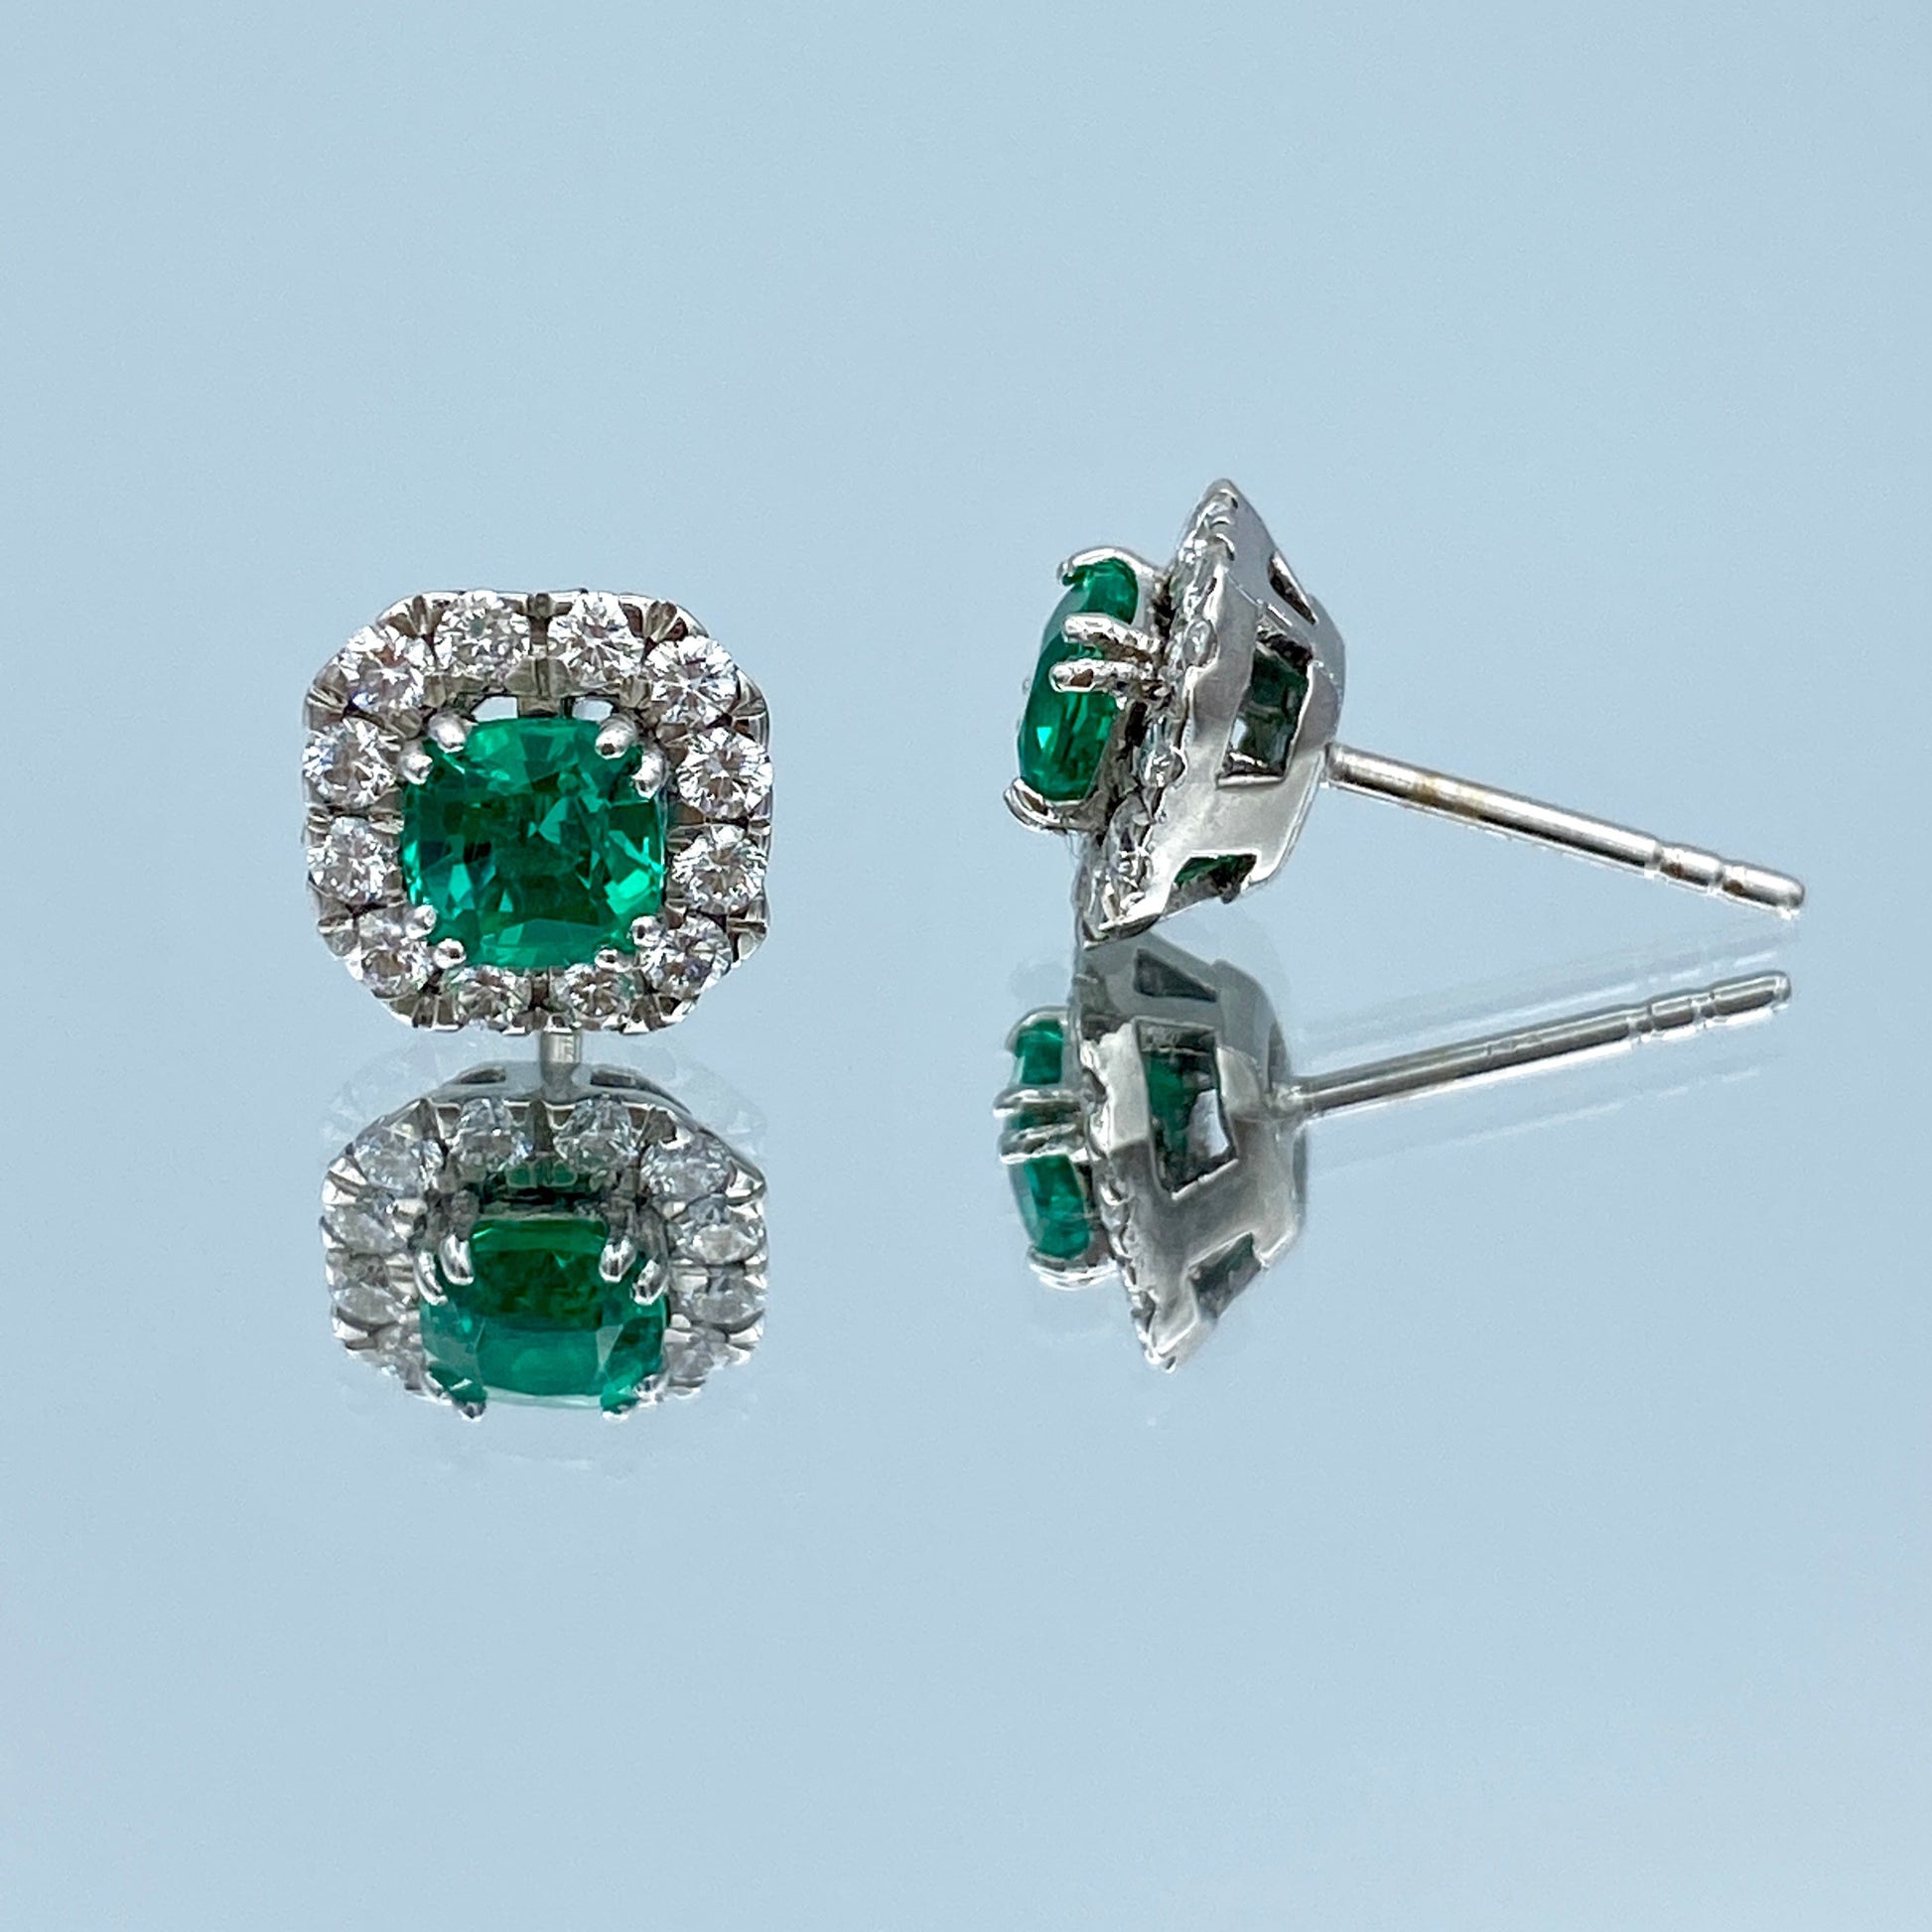 Emerald Earrings with a Diamond Halo in 14K White Gold - L and L Jewelry